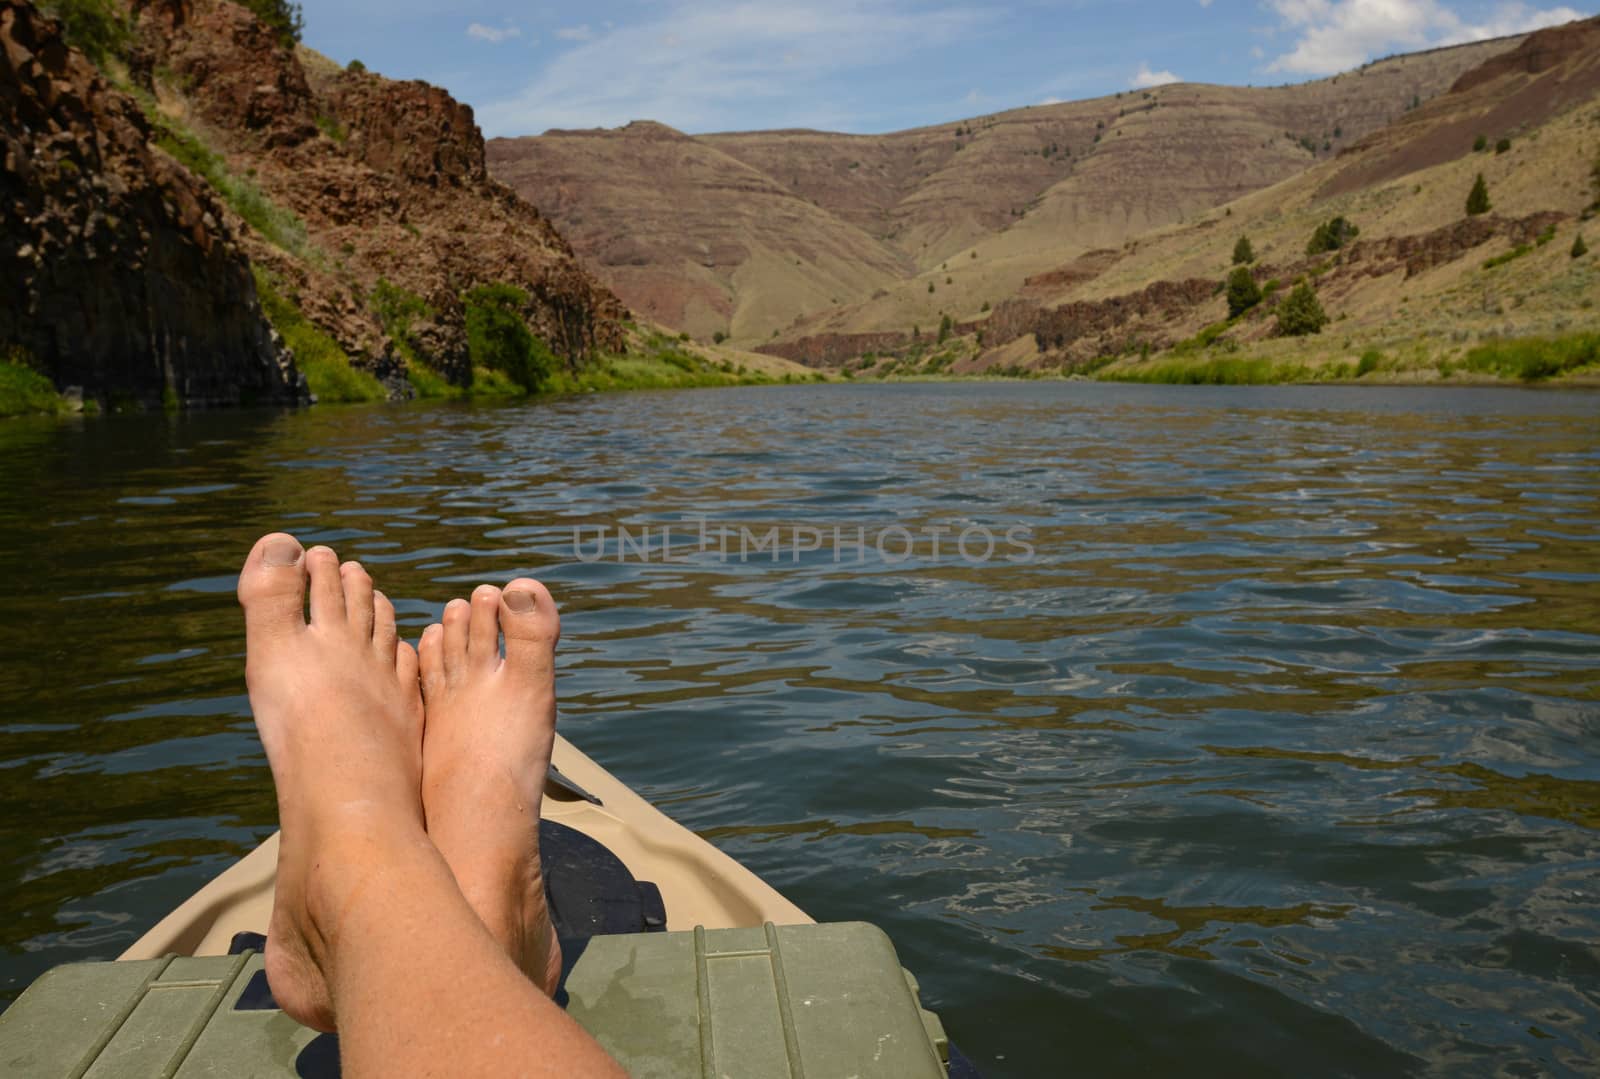 relaxing on a kayak in a beautiful landscape in oregon with mountains